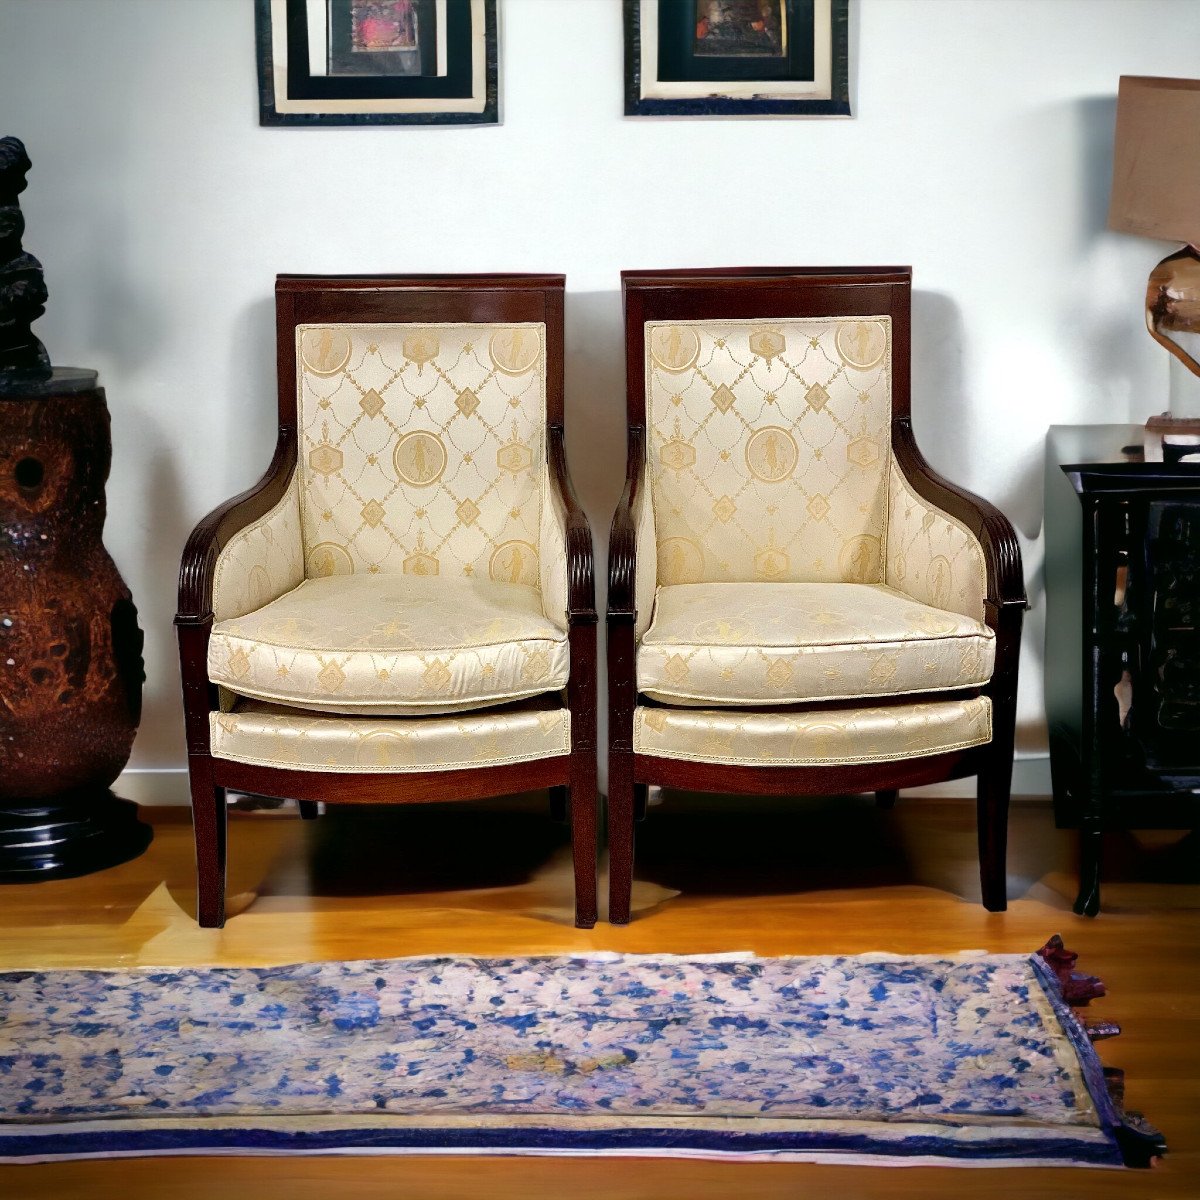 Pair Of Bergere Armchairs From The Empire Period-photo-5